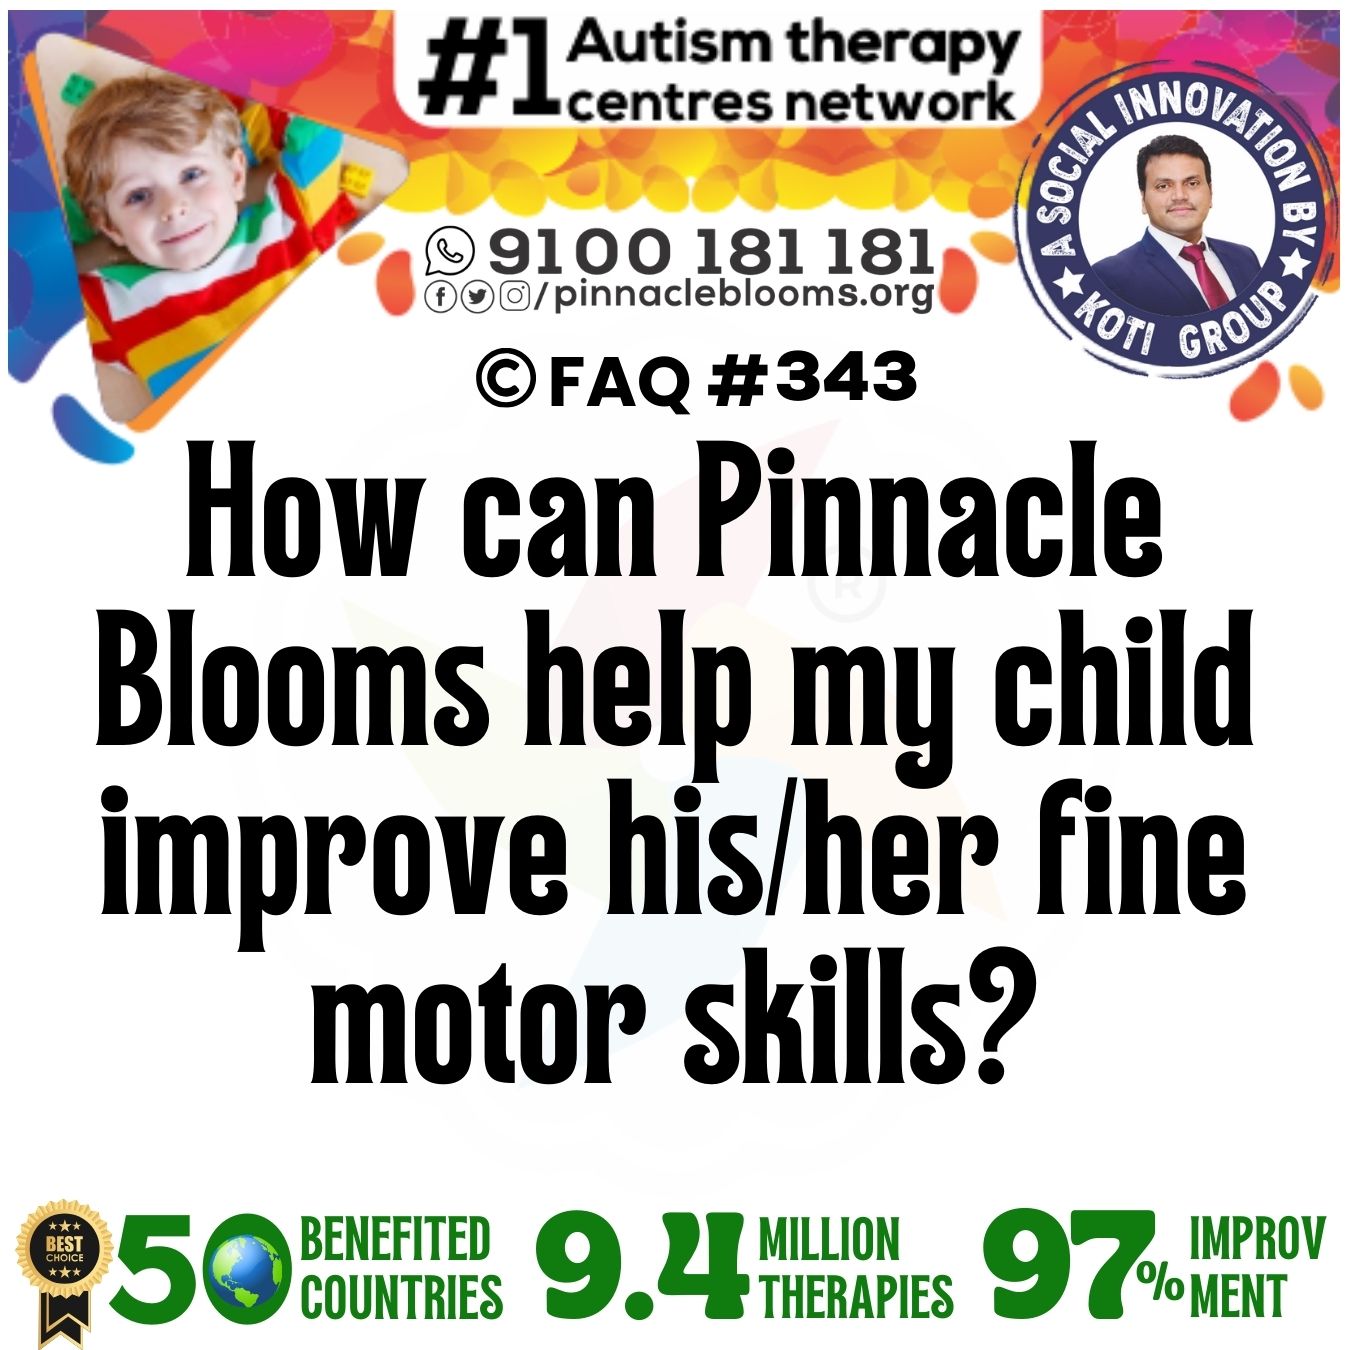 How can Pinnacle Blooms help my child improve his/her fine motor skills?